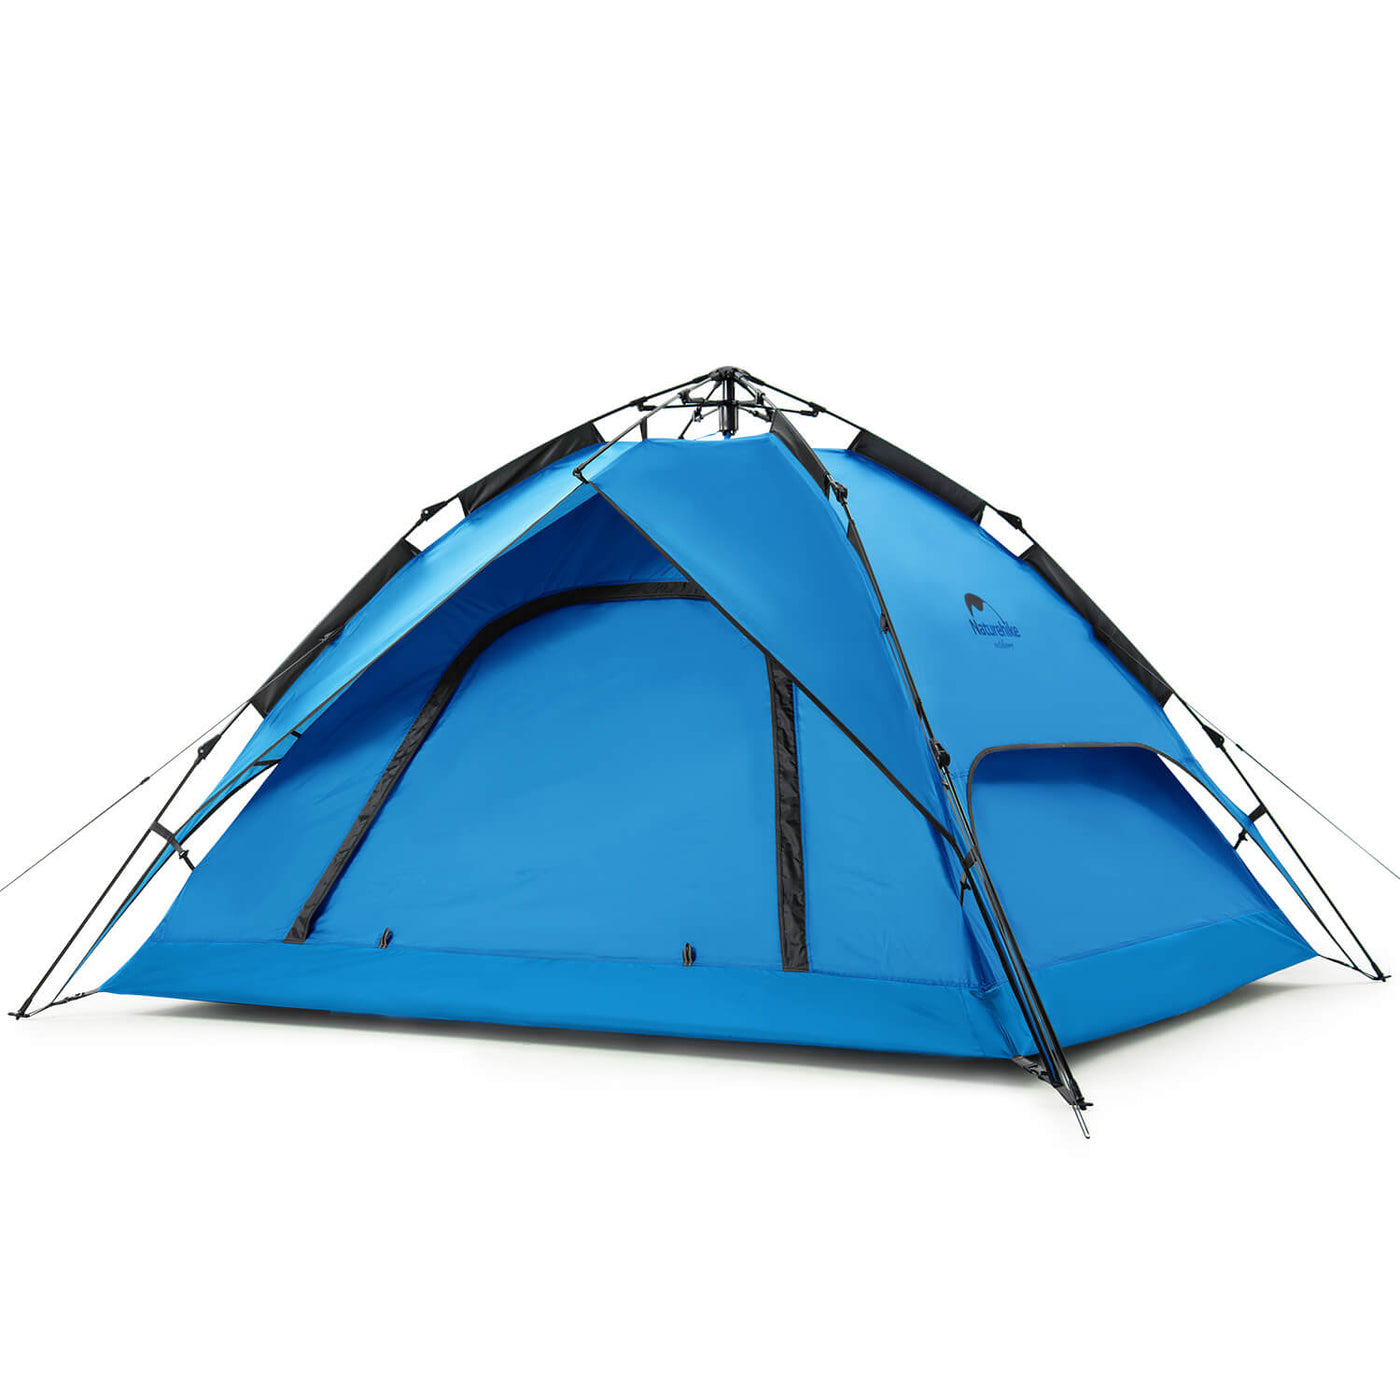 Fully automatic camping tent